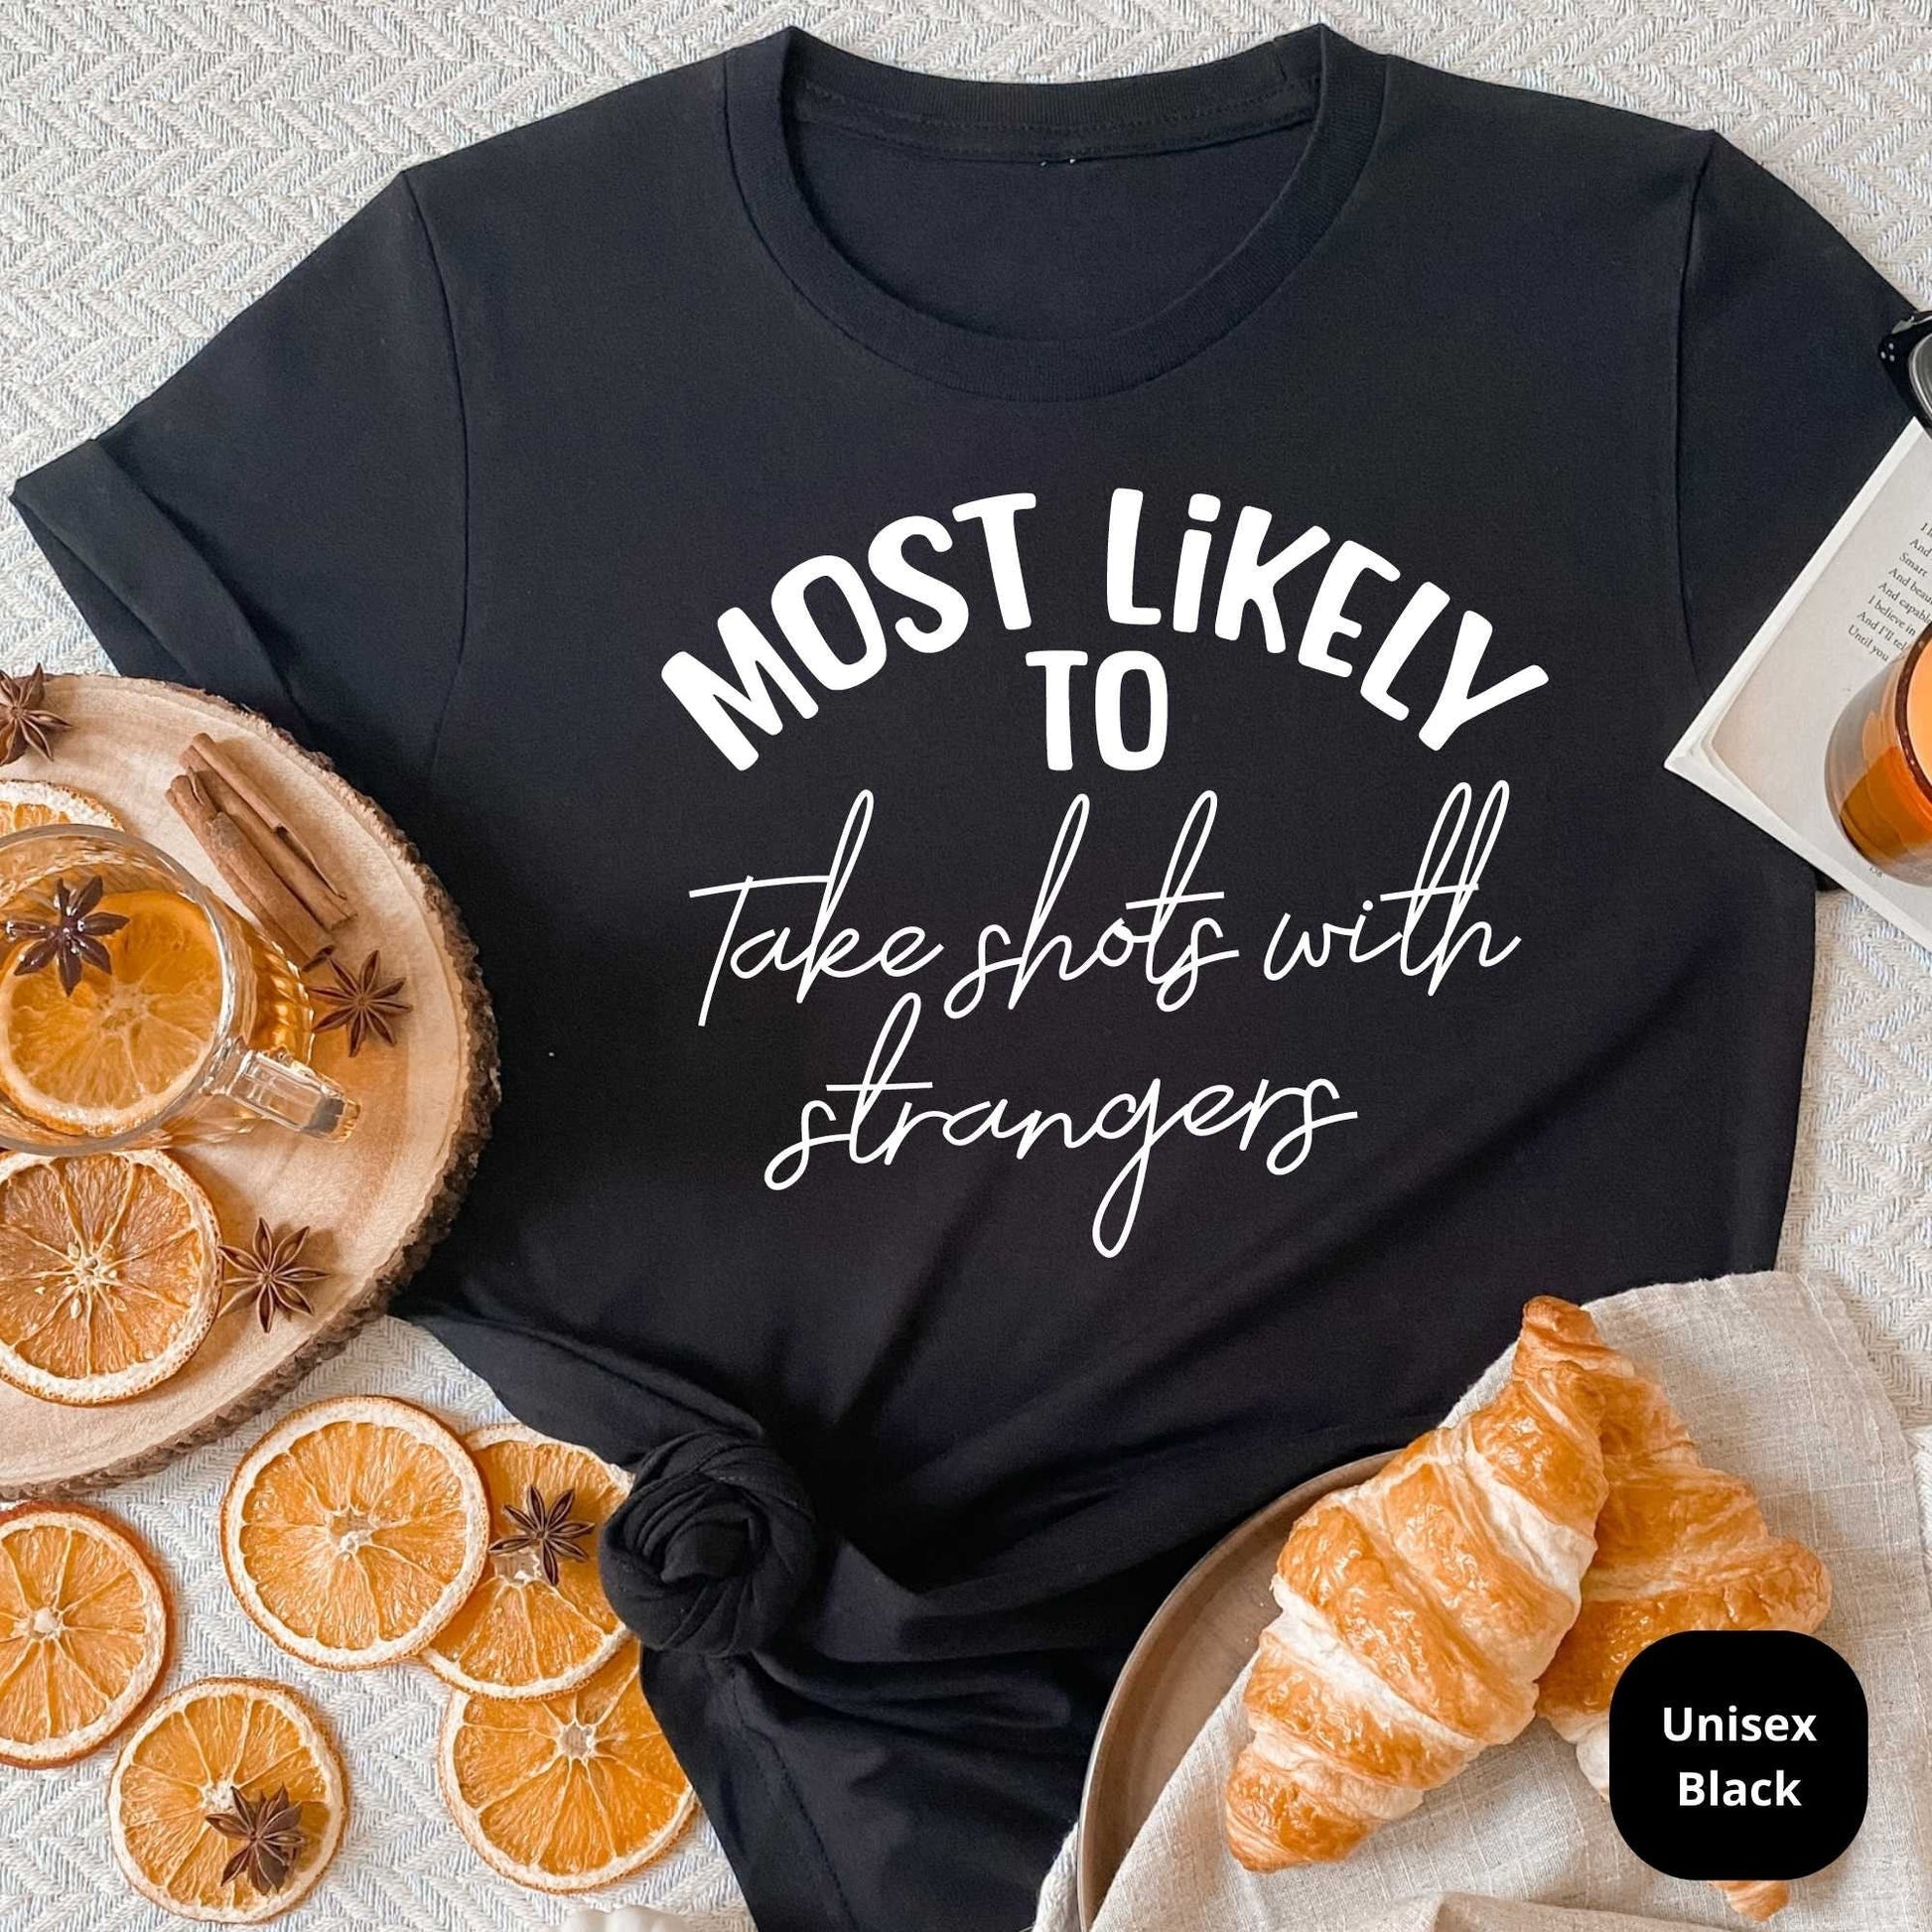 Most Likely To Shirts, Bachelorette Party Shirts, Bachelors Party Shirts